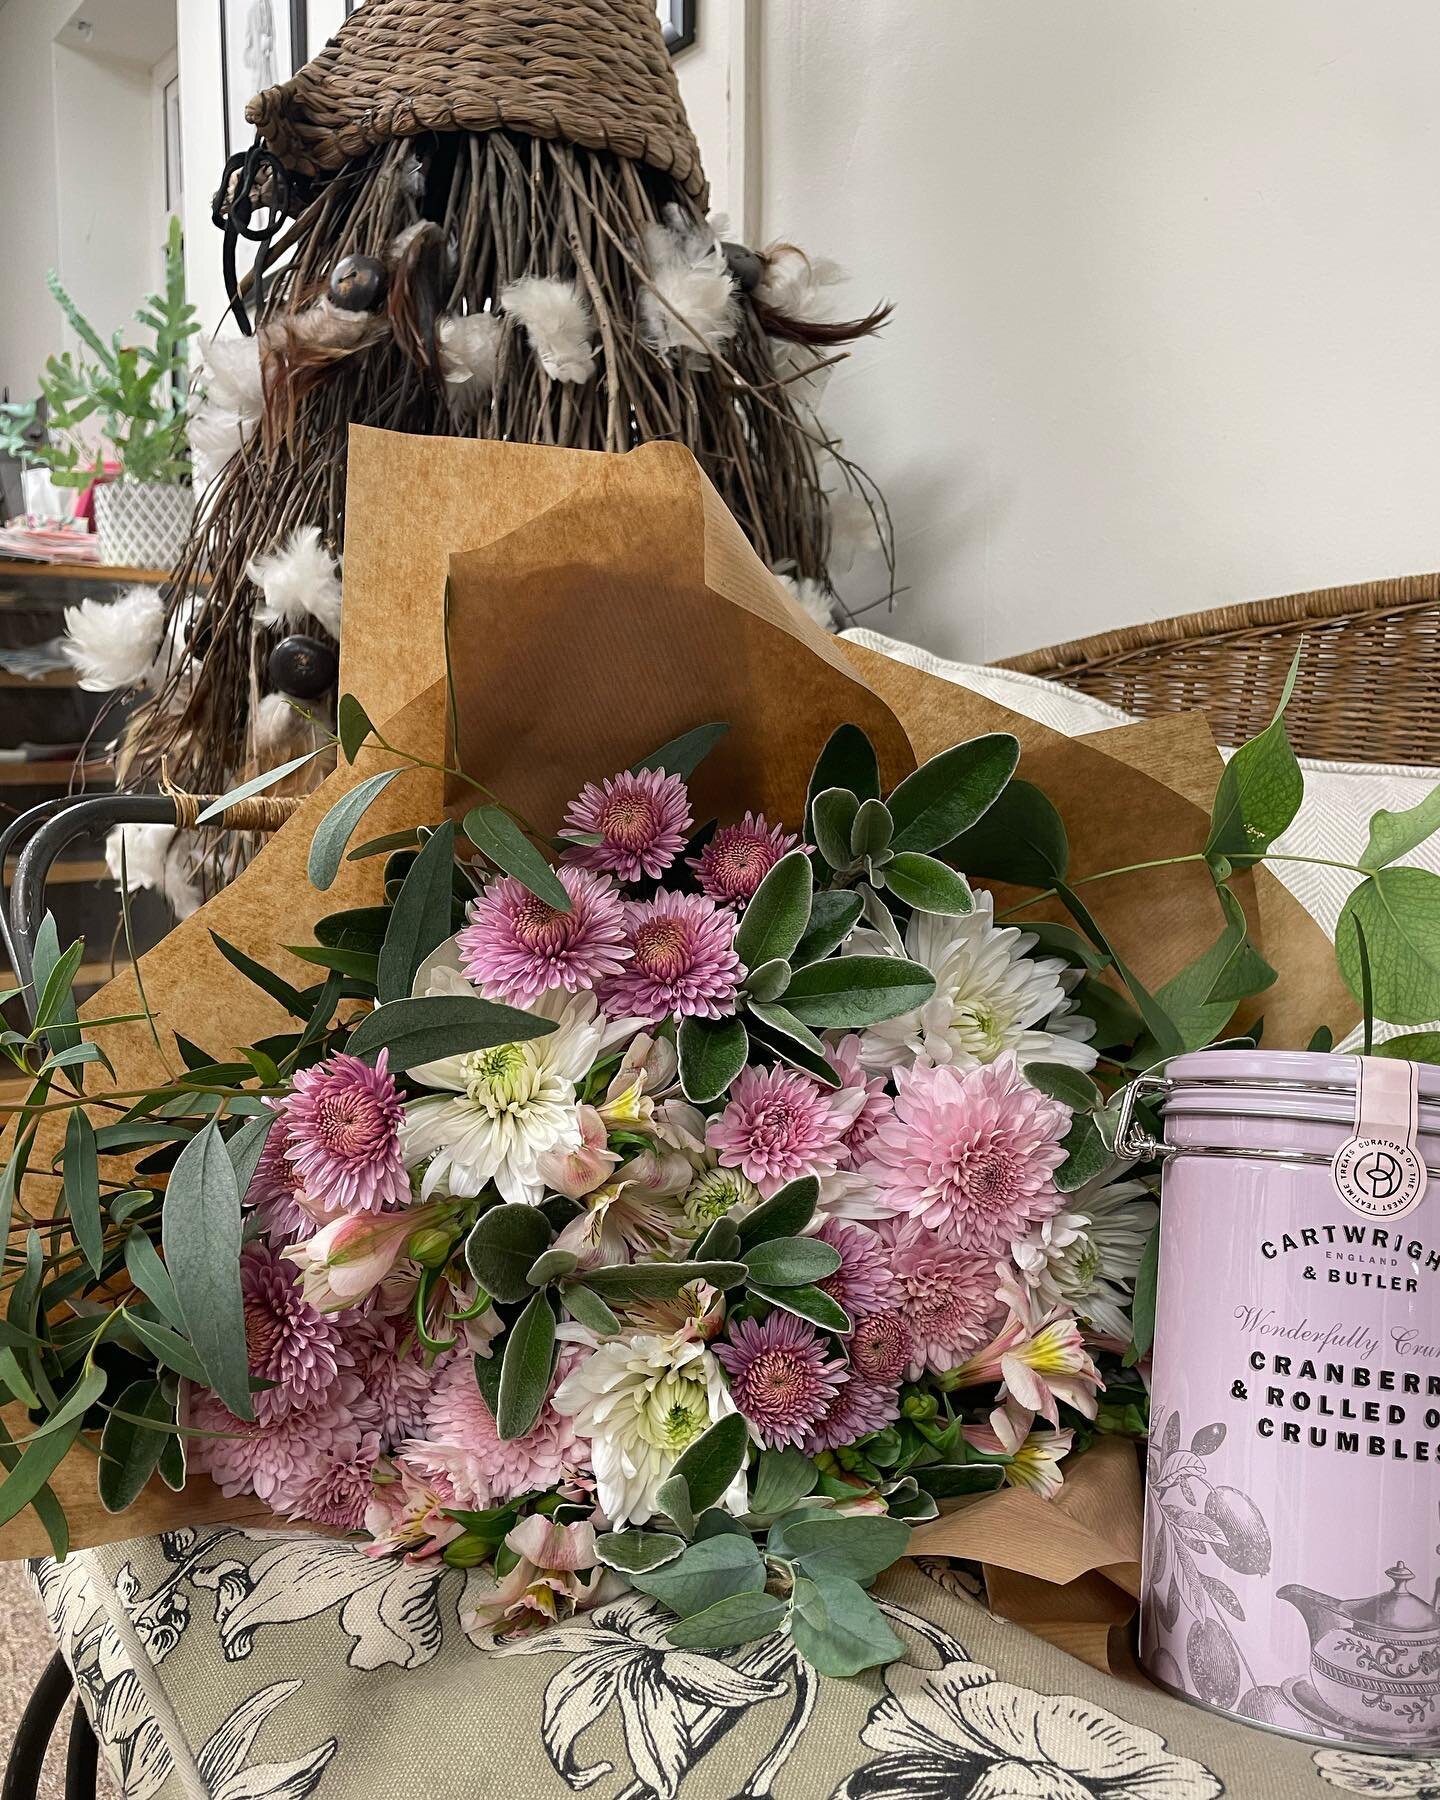 What a wonderful surprise to receive these beautiful flowers and cookies from the family of our beautiful bride 💗

We completed her wedding dress in 24 hours! 
Look out for details of this epic wedding, planned for months but from a distance, hence 